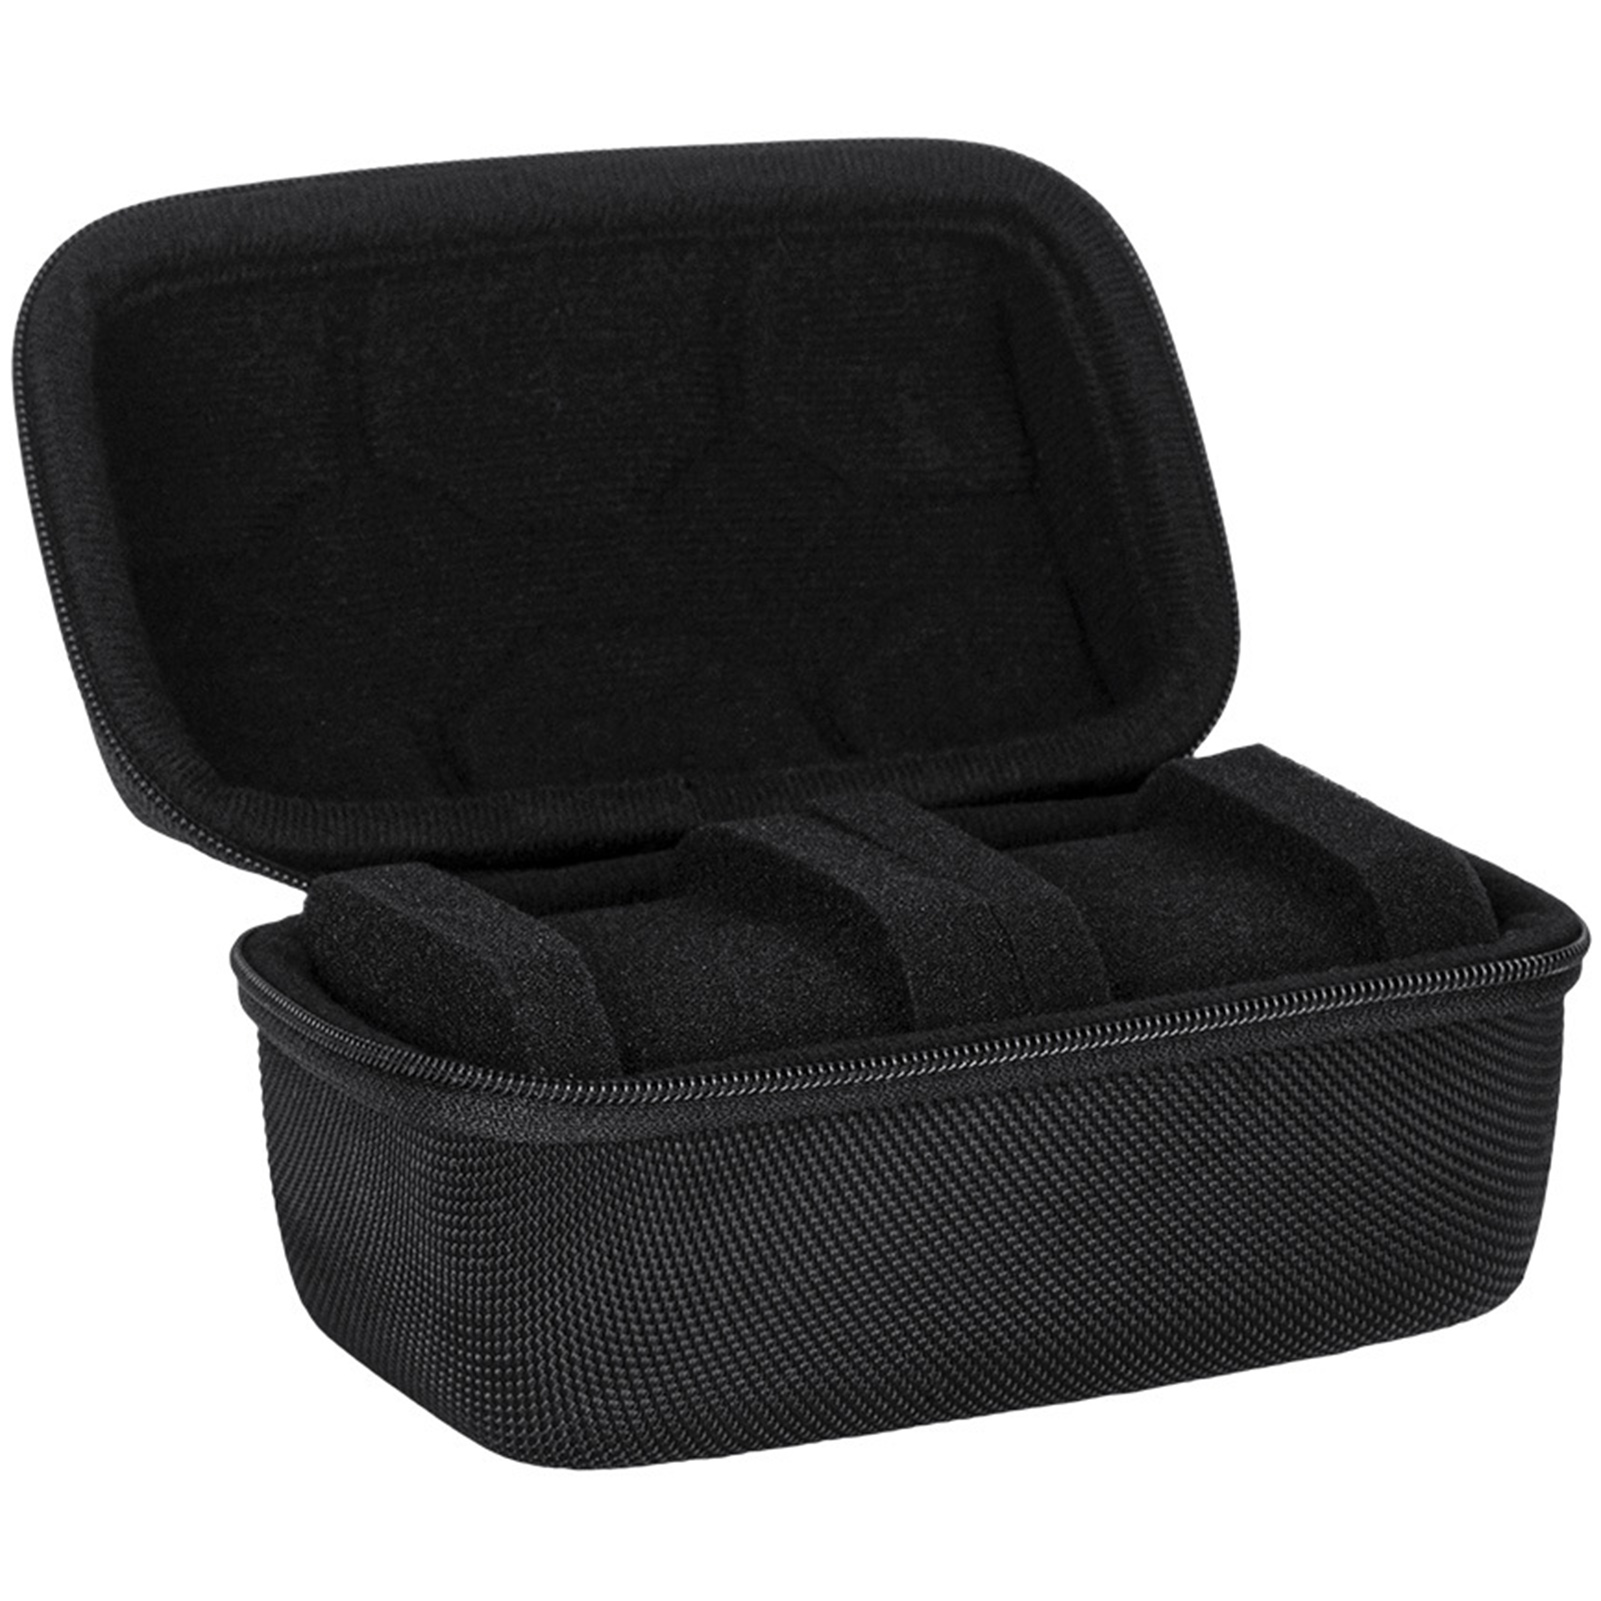 Megawheels Travel Watch Case for Large Watches